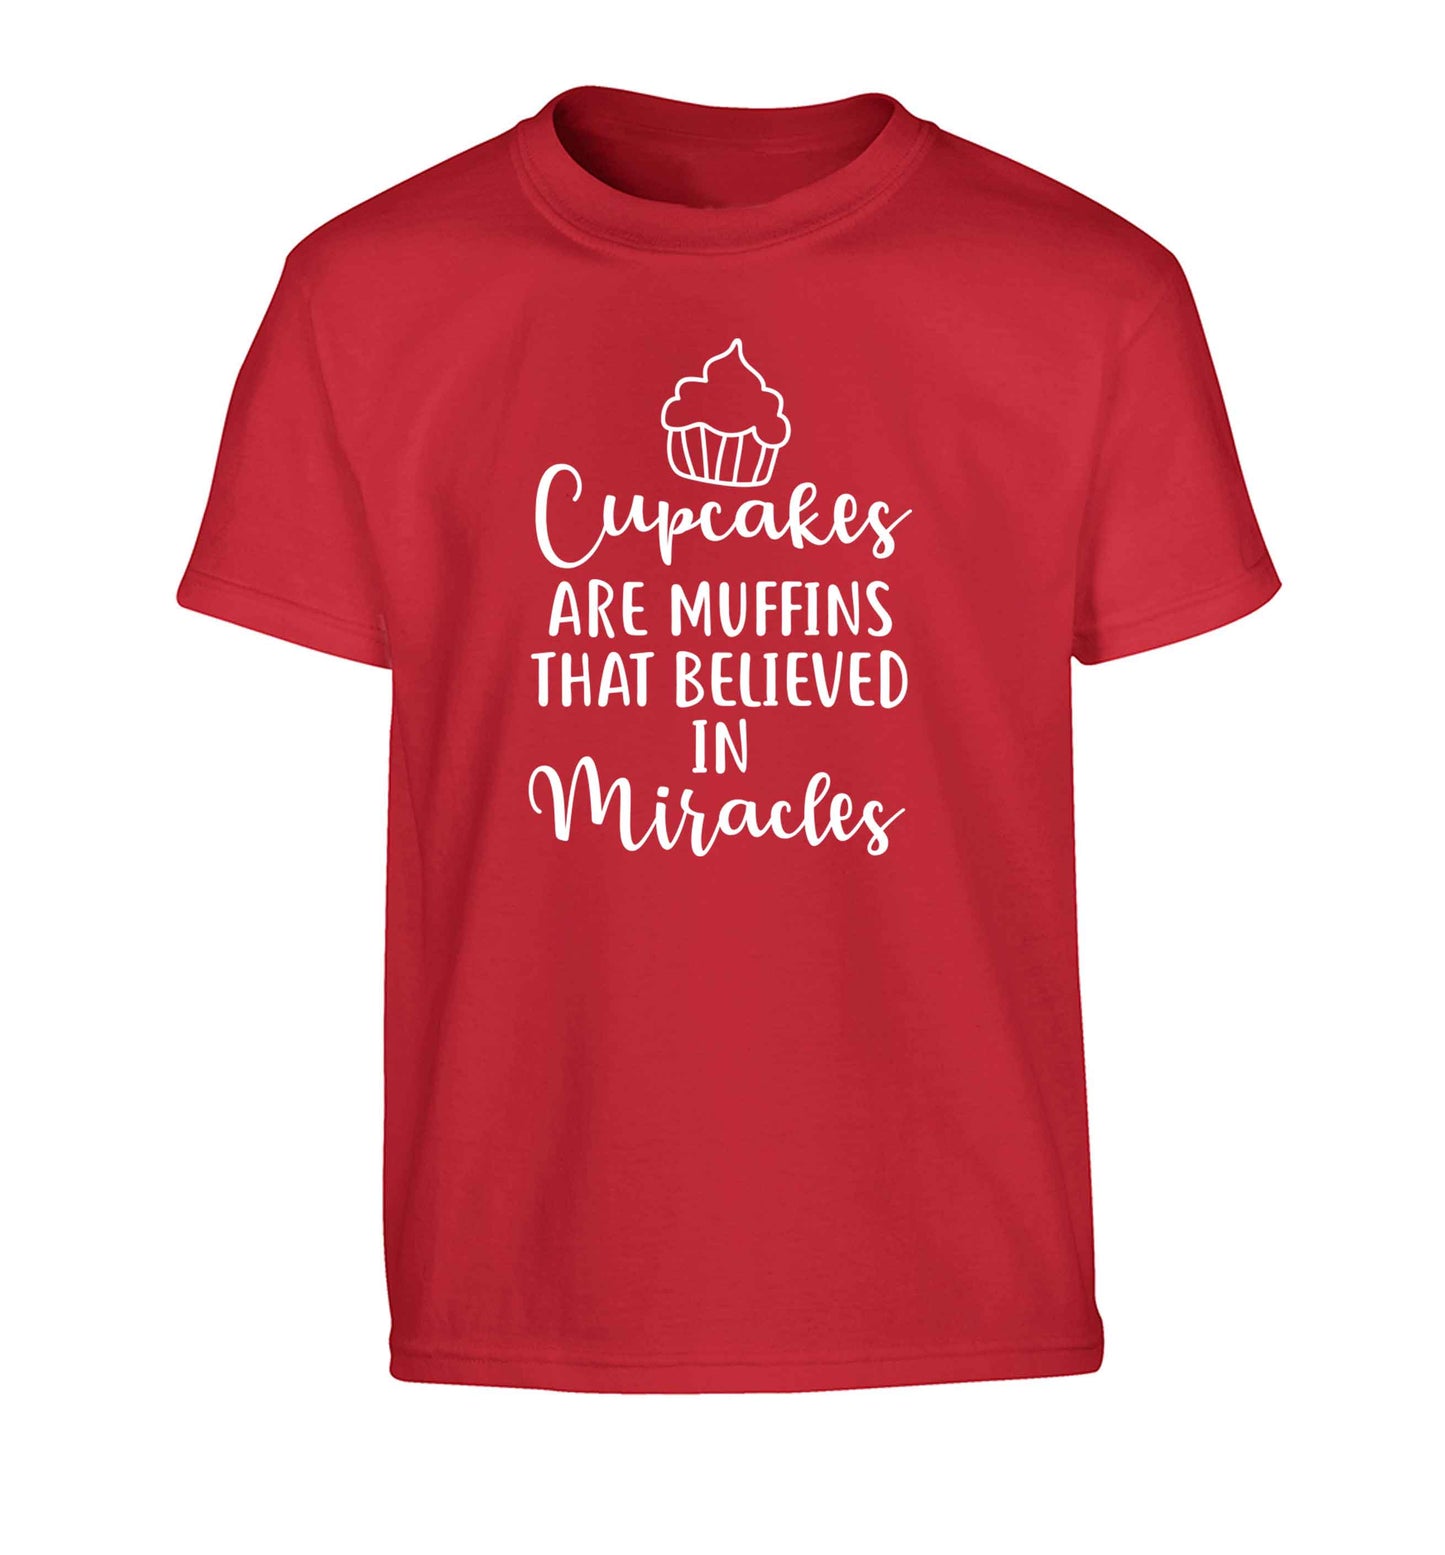 Cupcakes muffins that believed in miracles Children's red Tshirt 12-13 Years